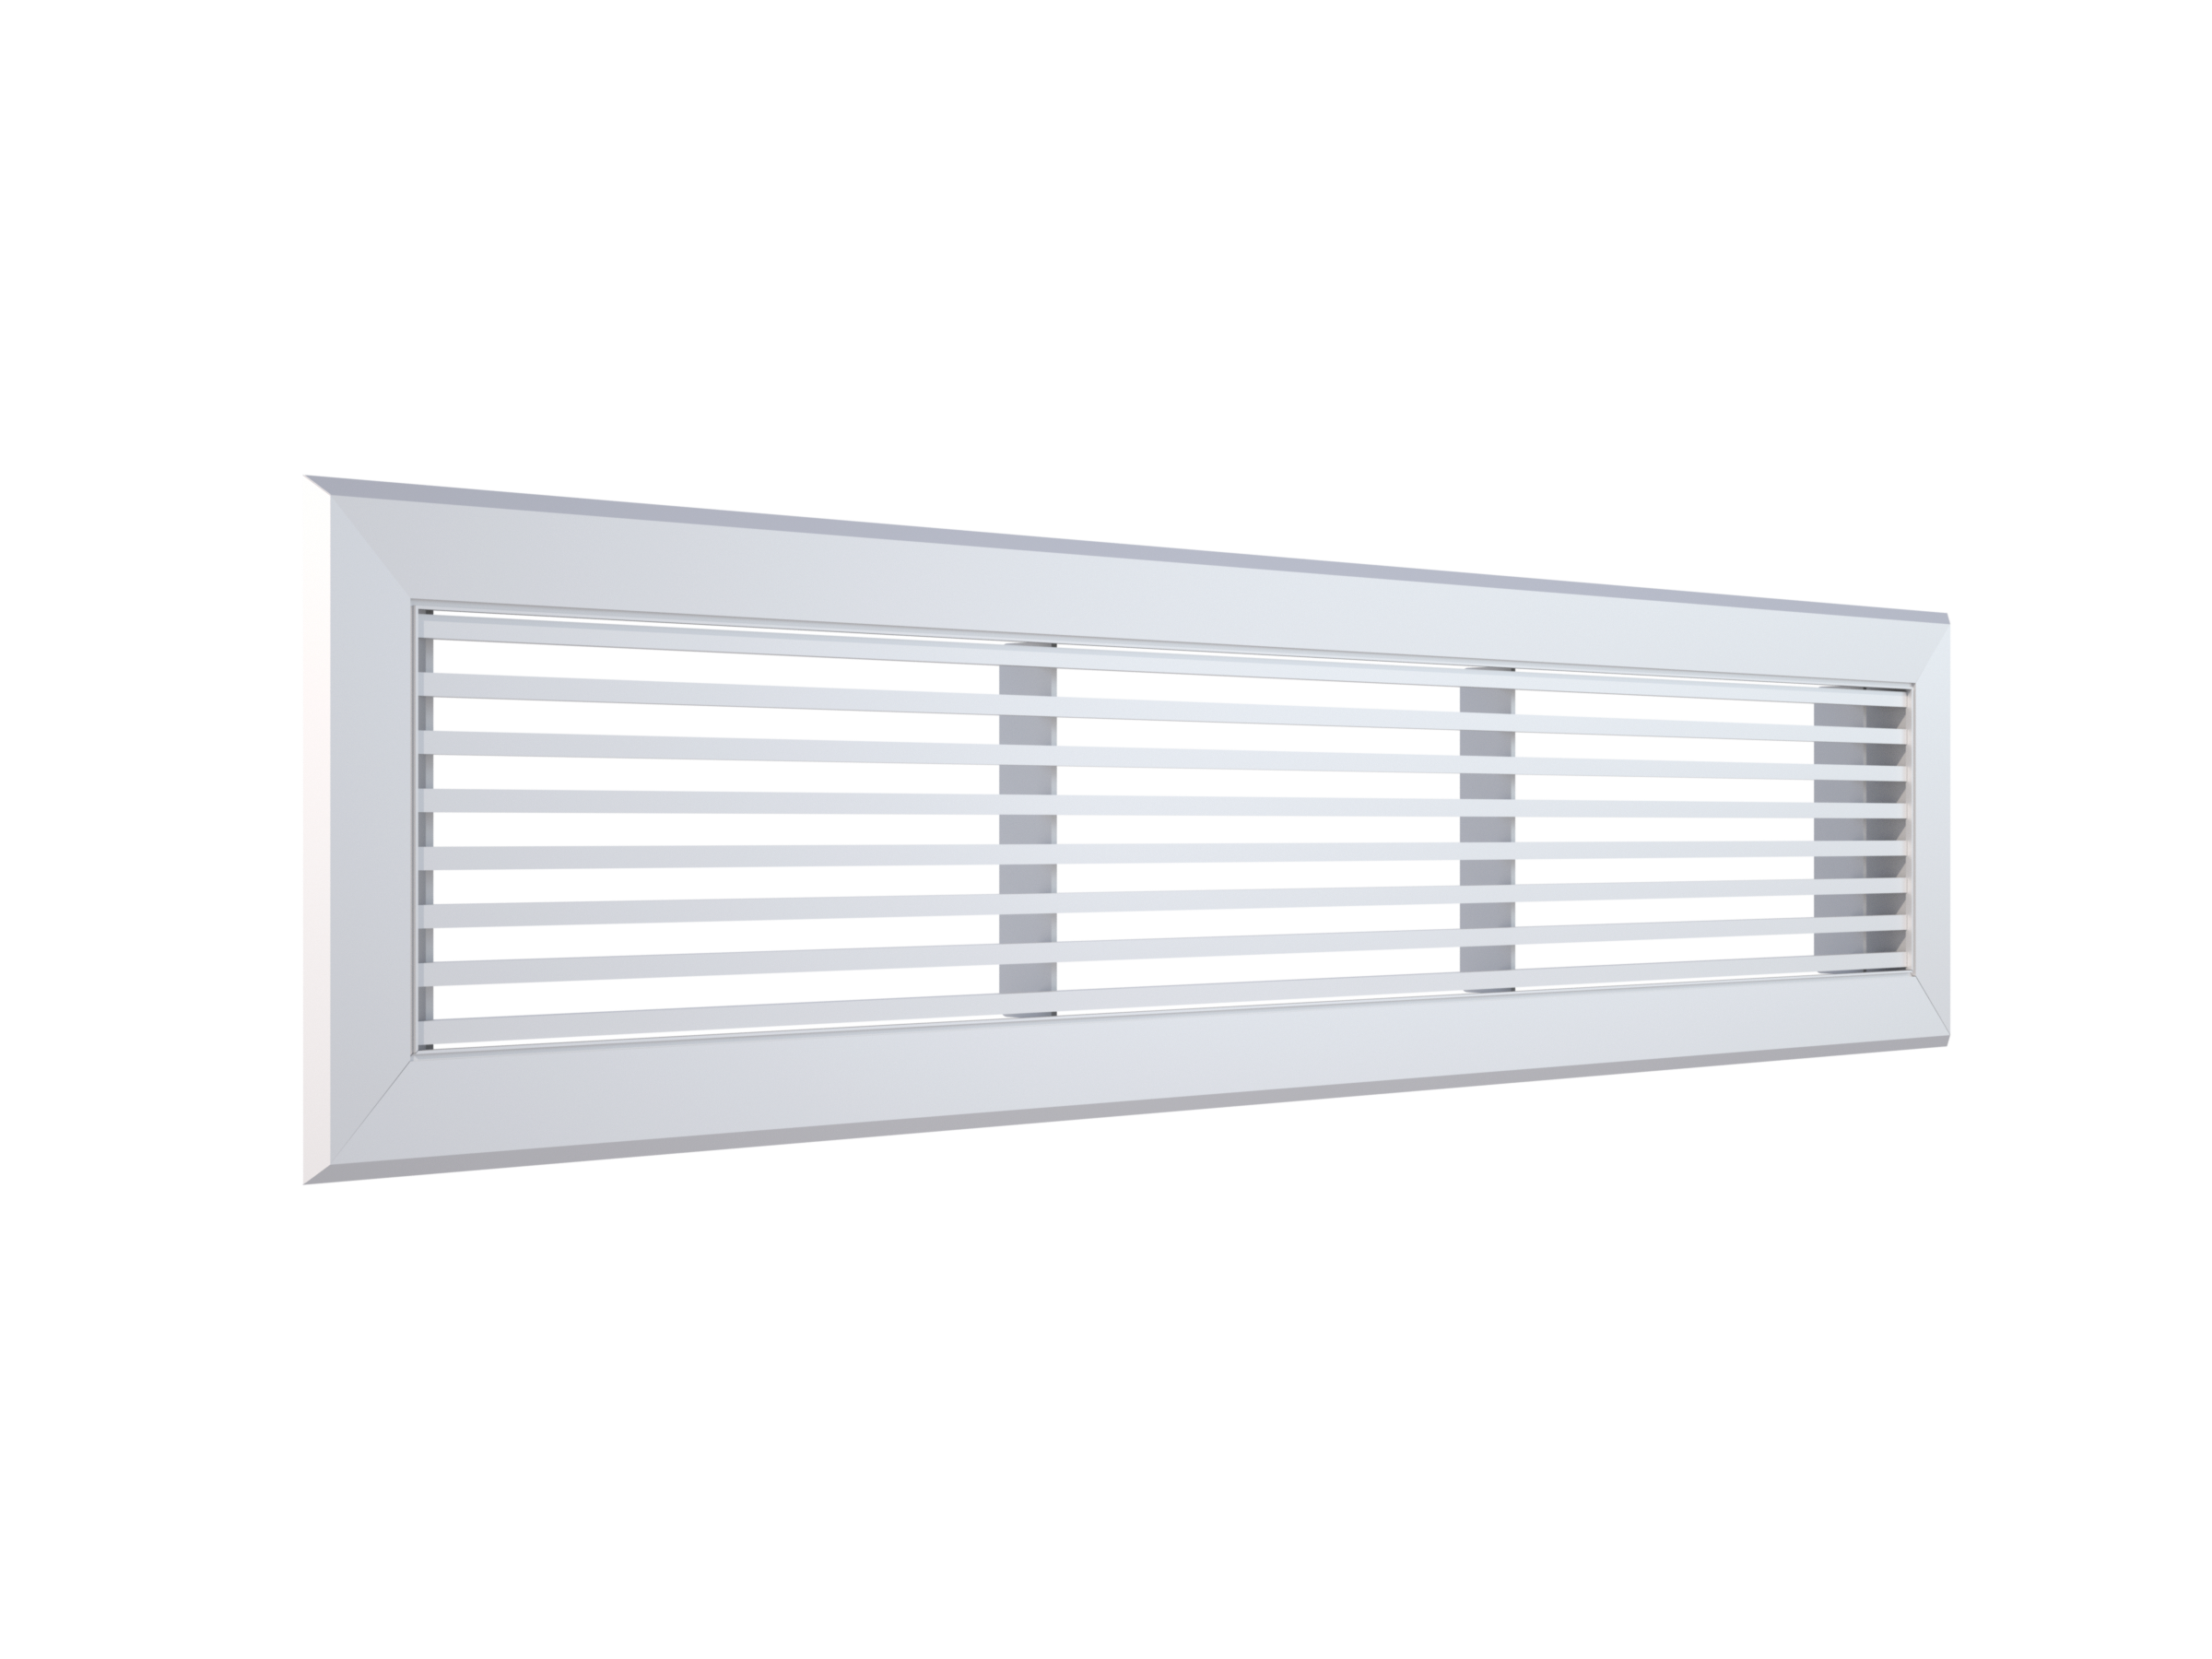 Holyoake LDH-1200 Linear Bar Grille with 0-degree air discharge and 12mm blade spacing